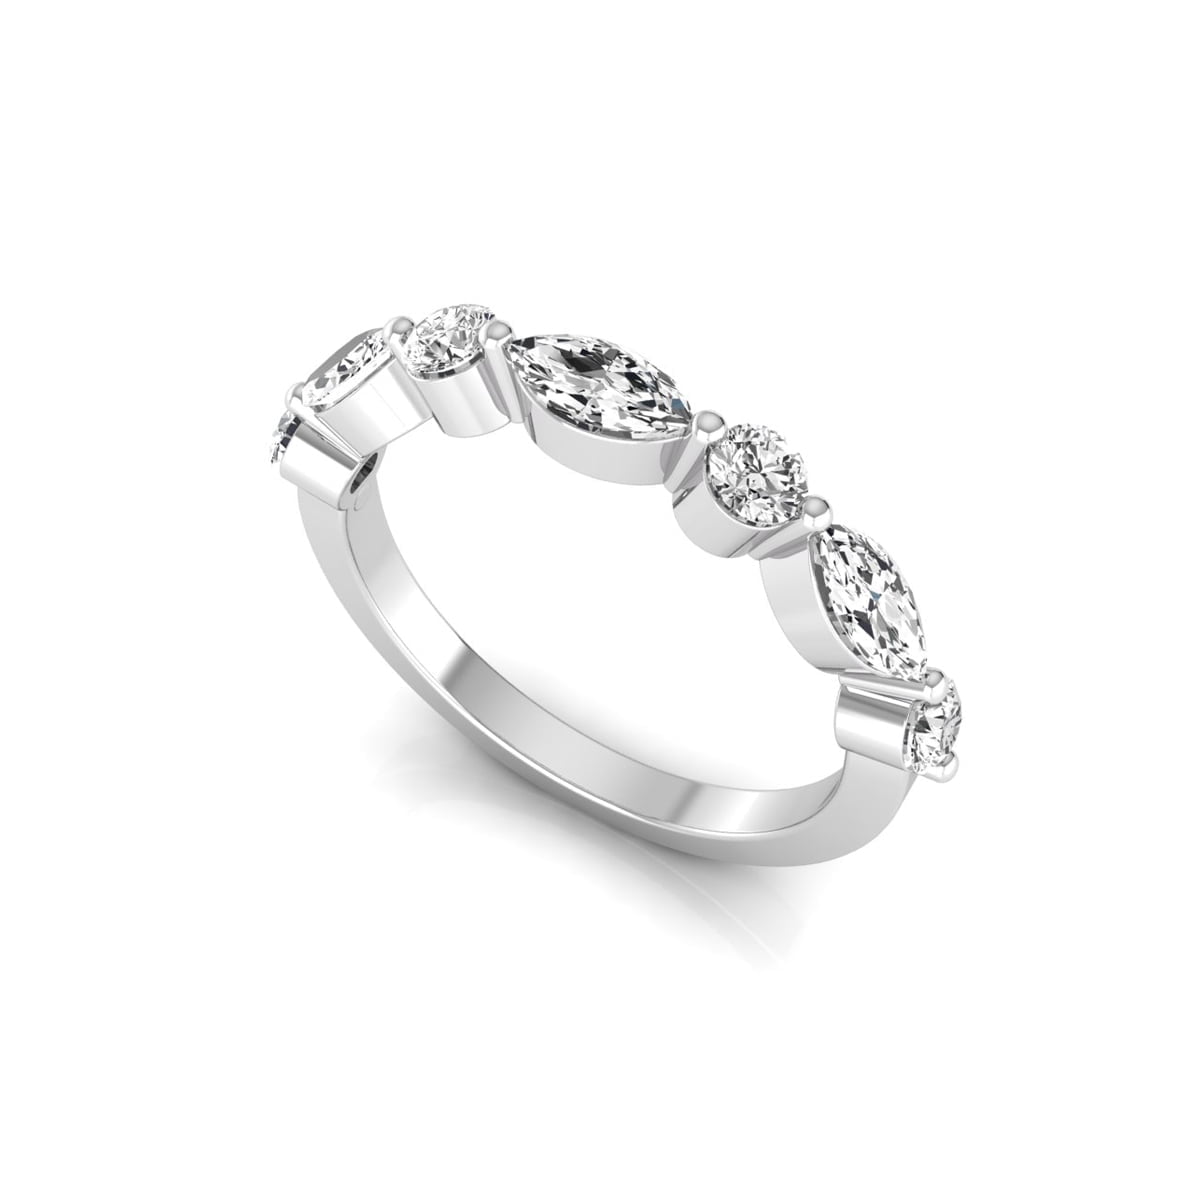 Single Prong Half Eternity Band with Marquise Cut CZ Stone